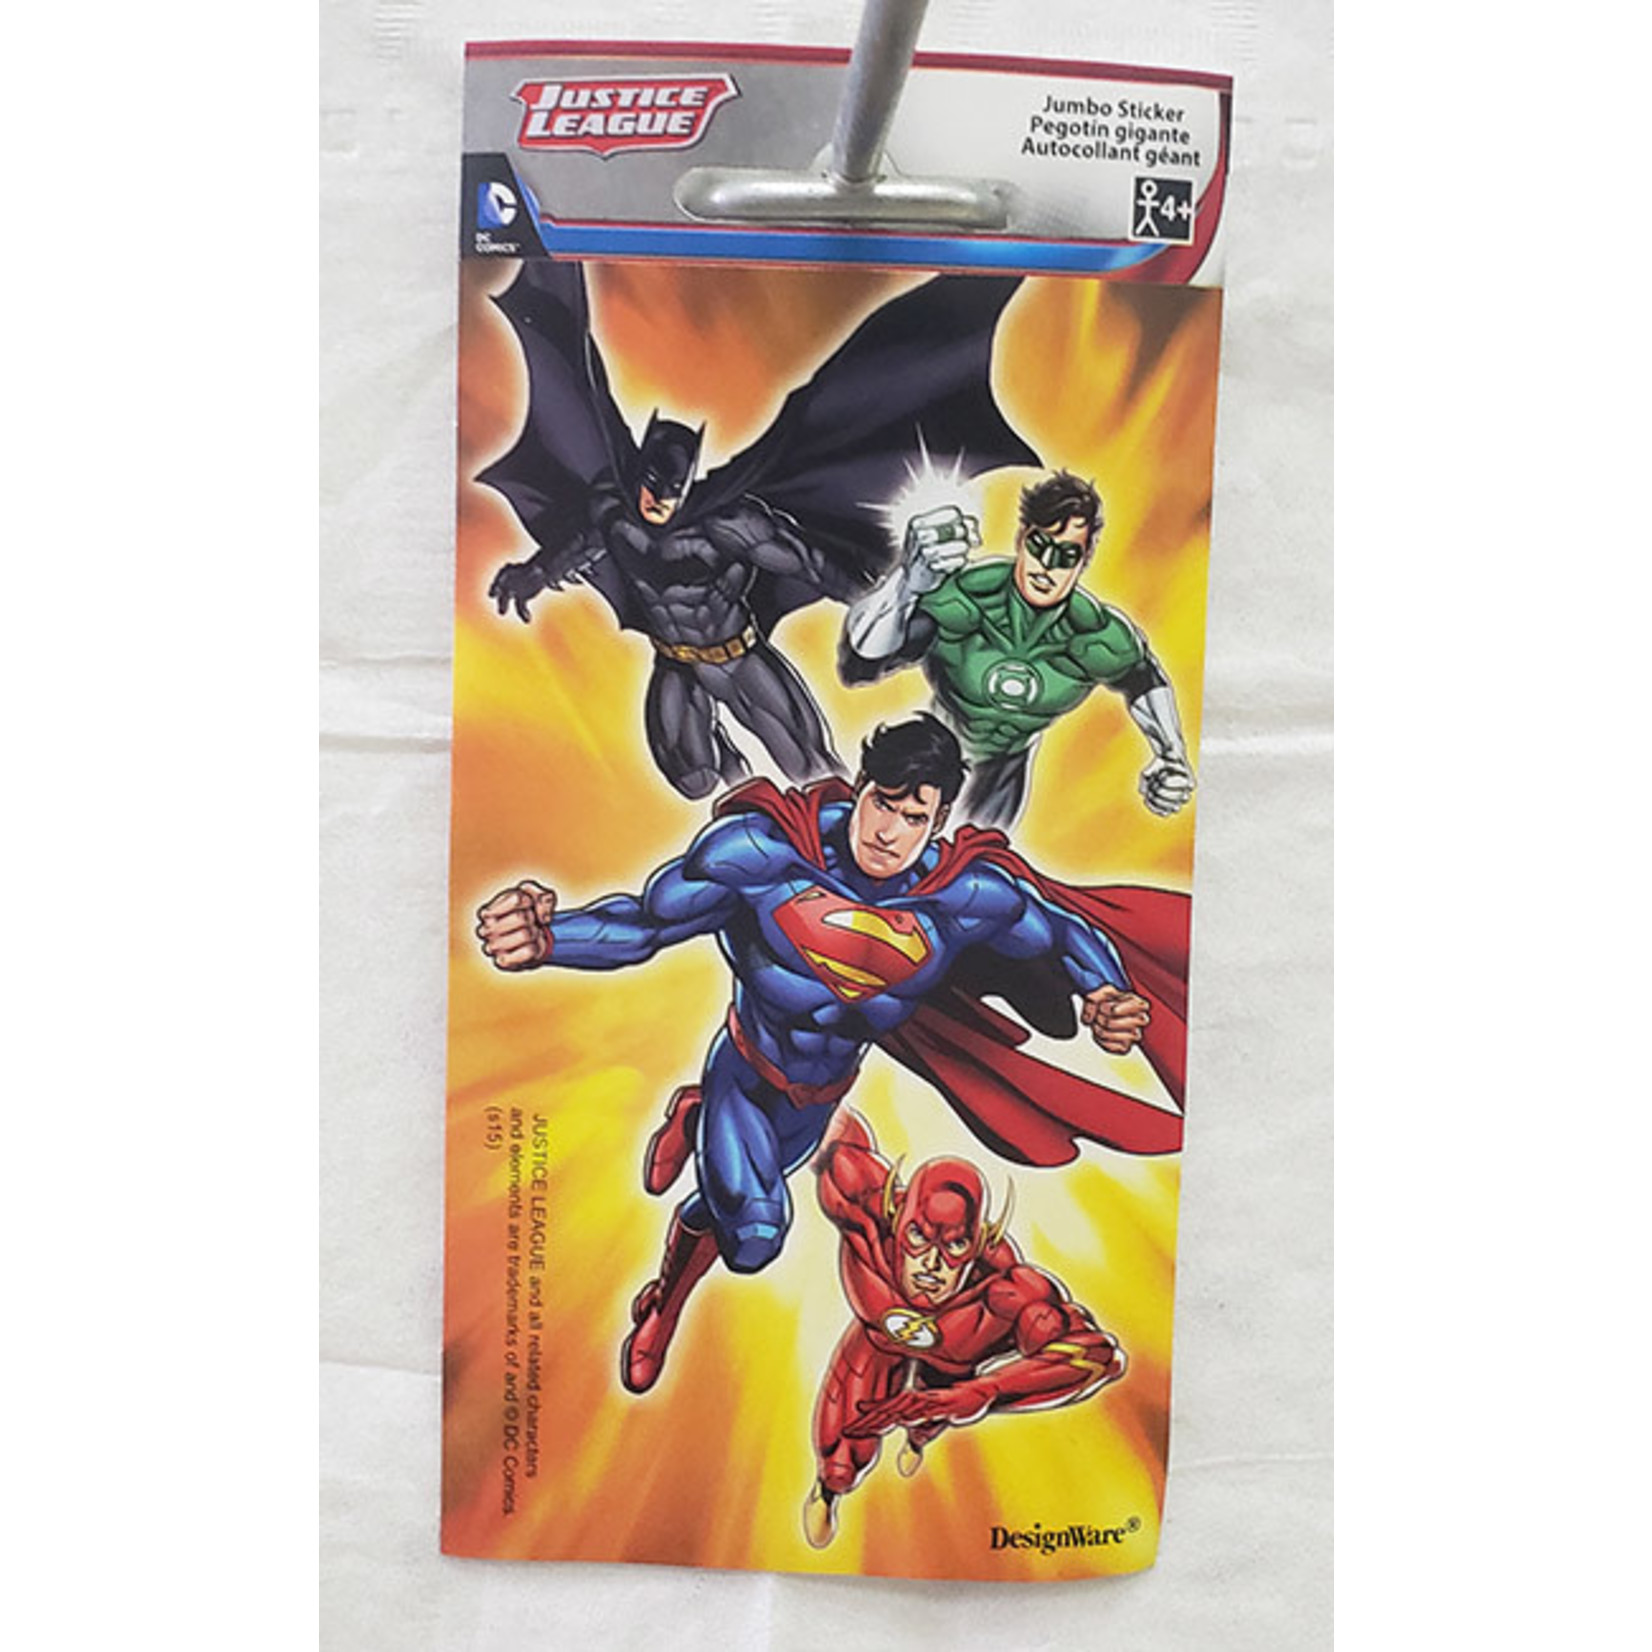 Amscan Justice League Jumbo Sticker - 1ct.